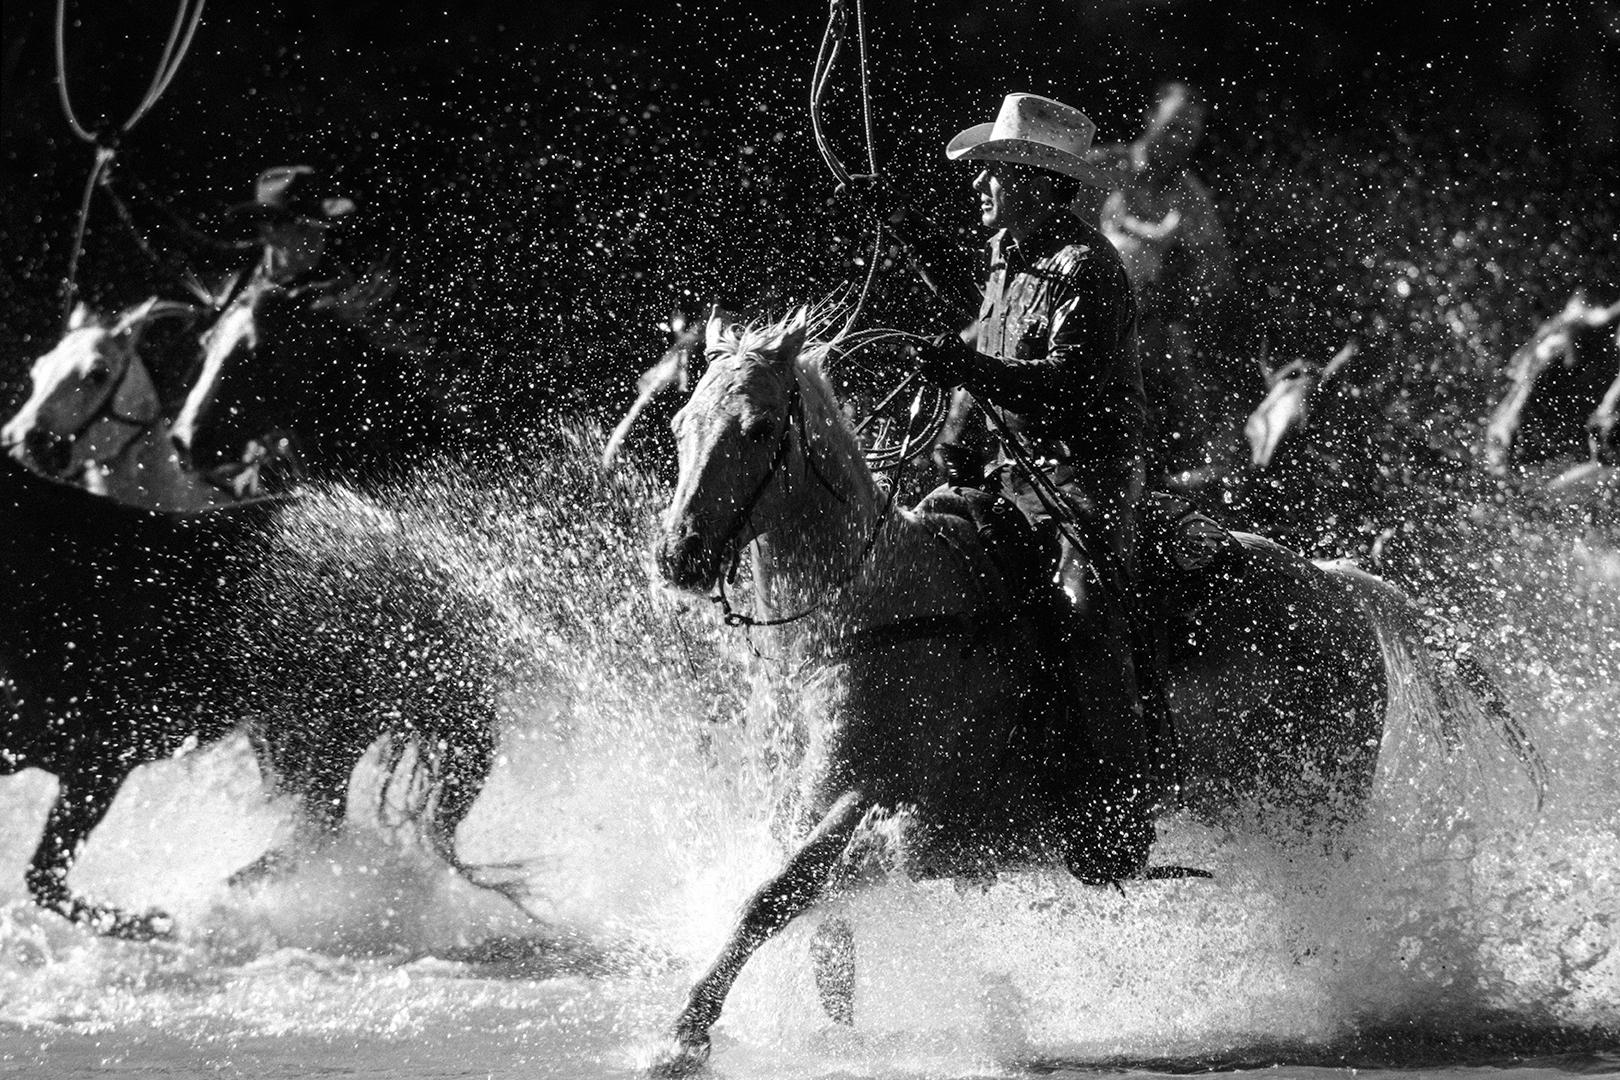 Hannes Schmid Black and White Photograph - Ride Up, Black and Wirte Photography, Marlboro Man, Horses